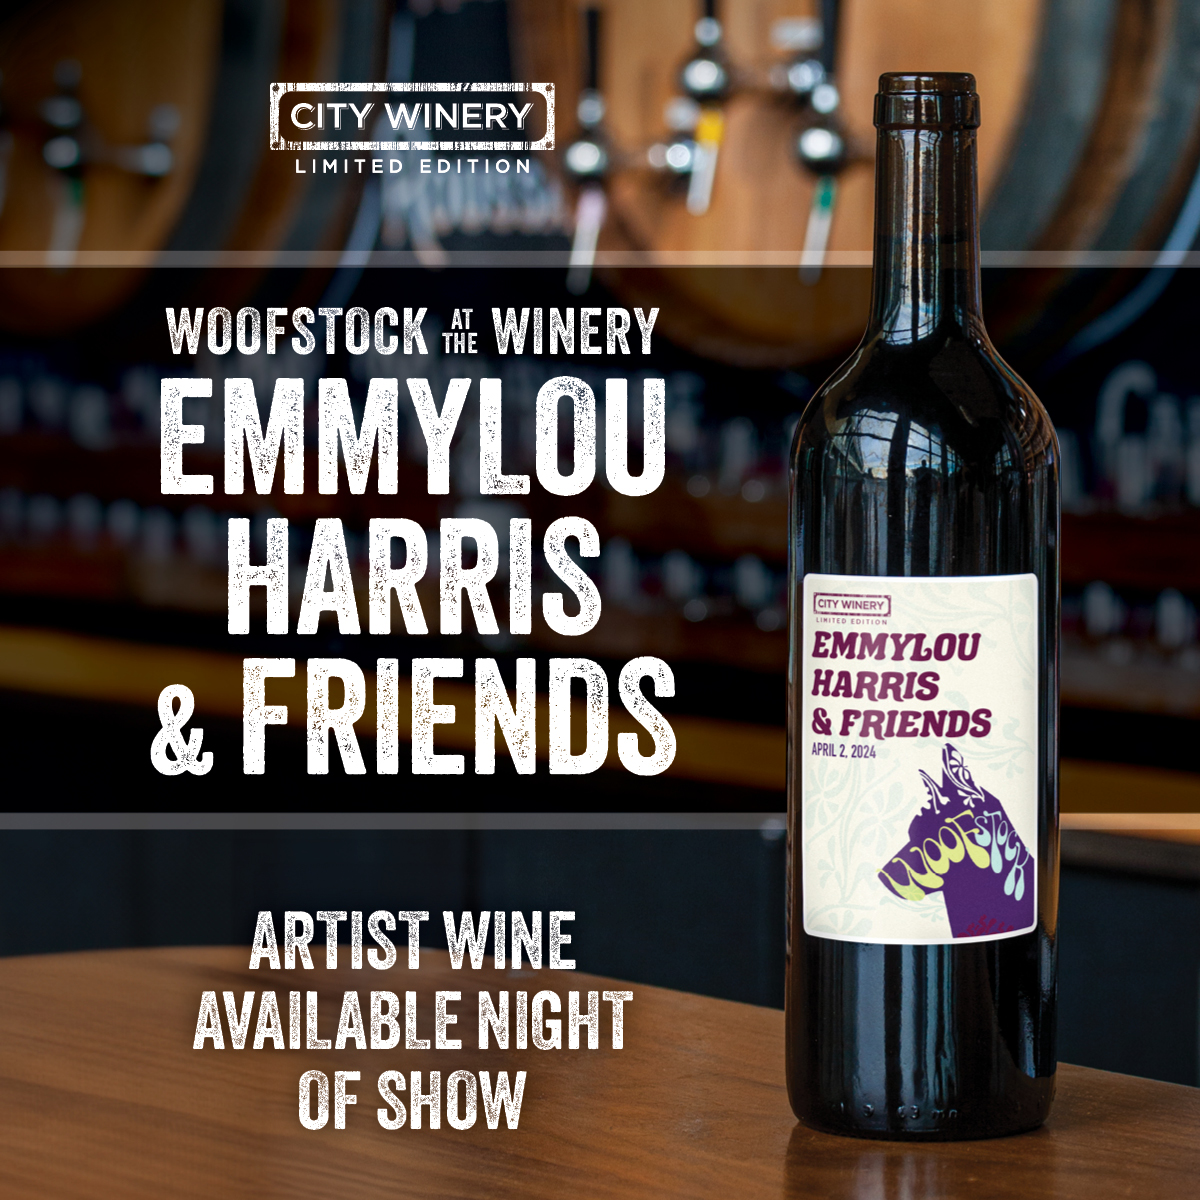 Only a few tickets left for Emmylou’s birthday benefit tonight at @CityWineryNSH! If you already have a ticket be sure to check out the featured artist wine available night of show only! Get tickets here emmylouharris.com/tour